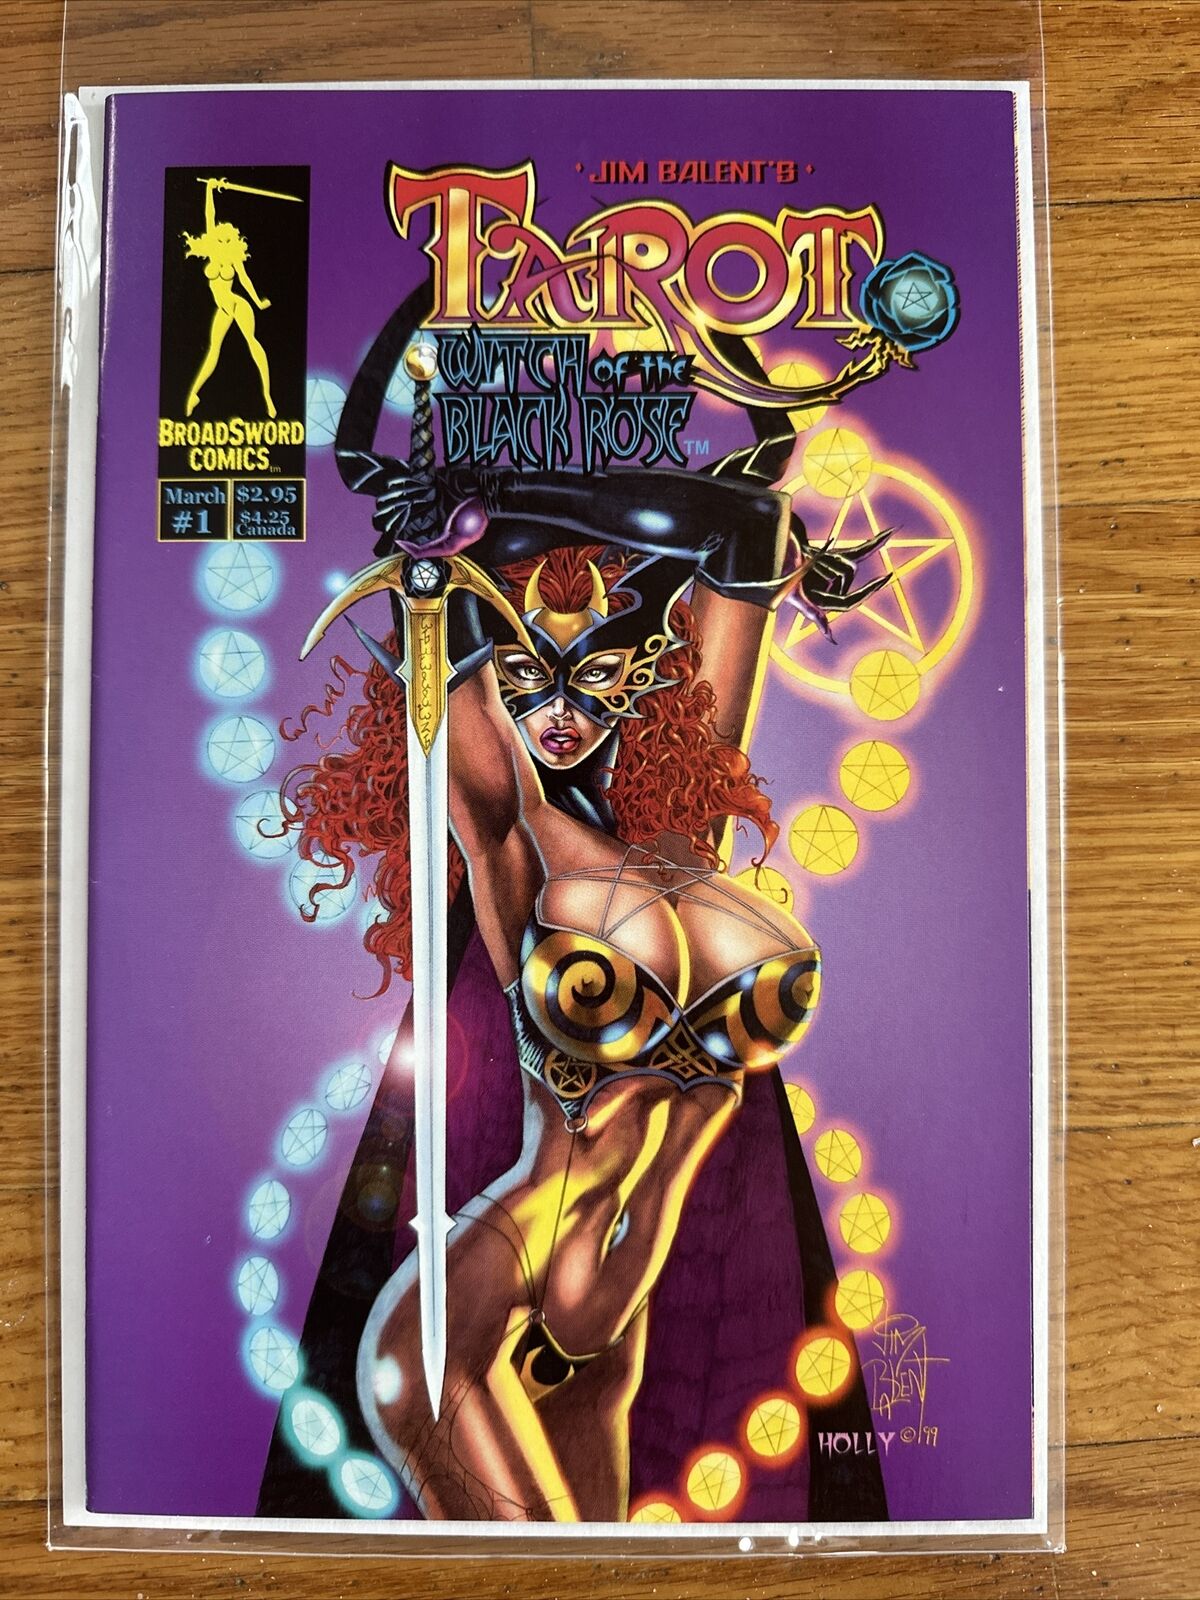 BROADSWORD COMICS TAROT WITCH OF THE BLACK ROSE #1 COVER A MARCH 2000